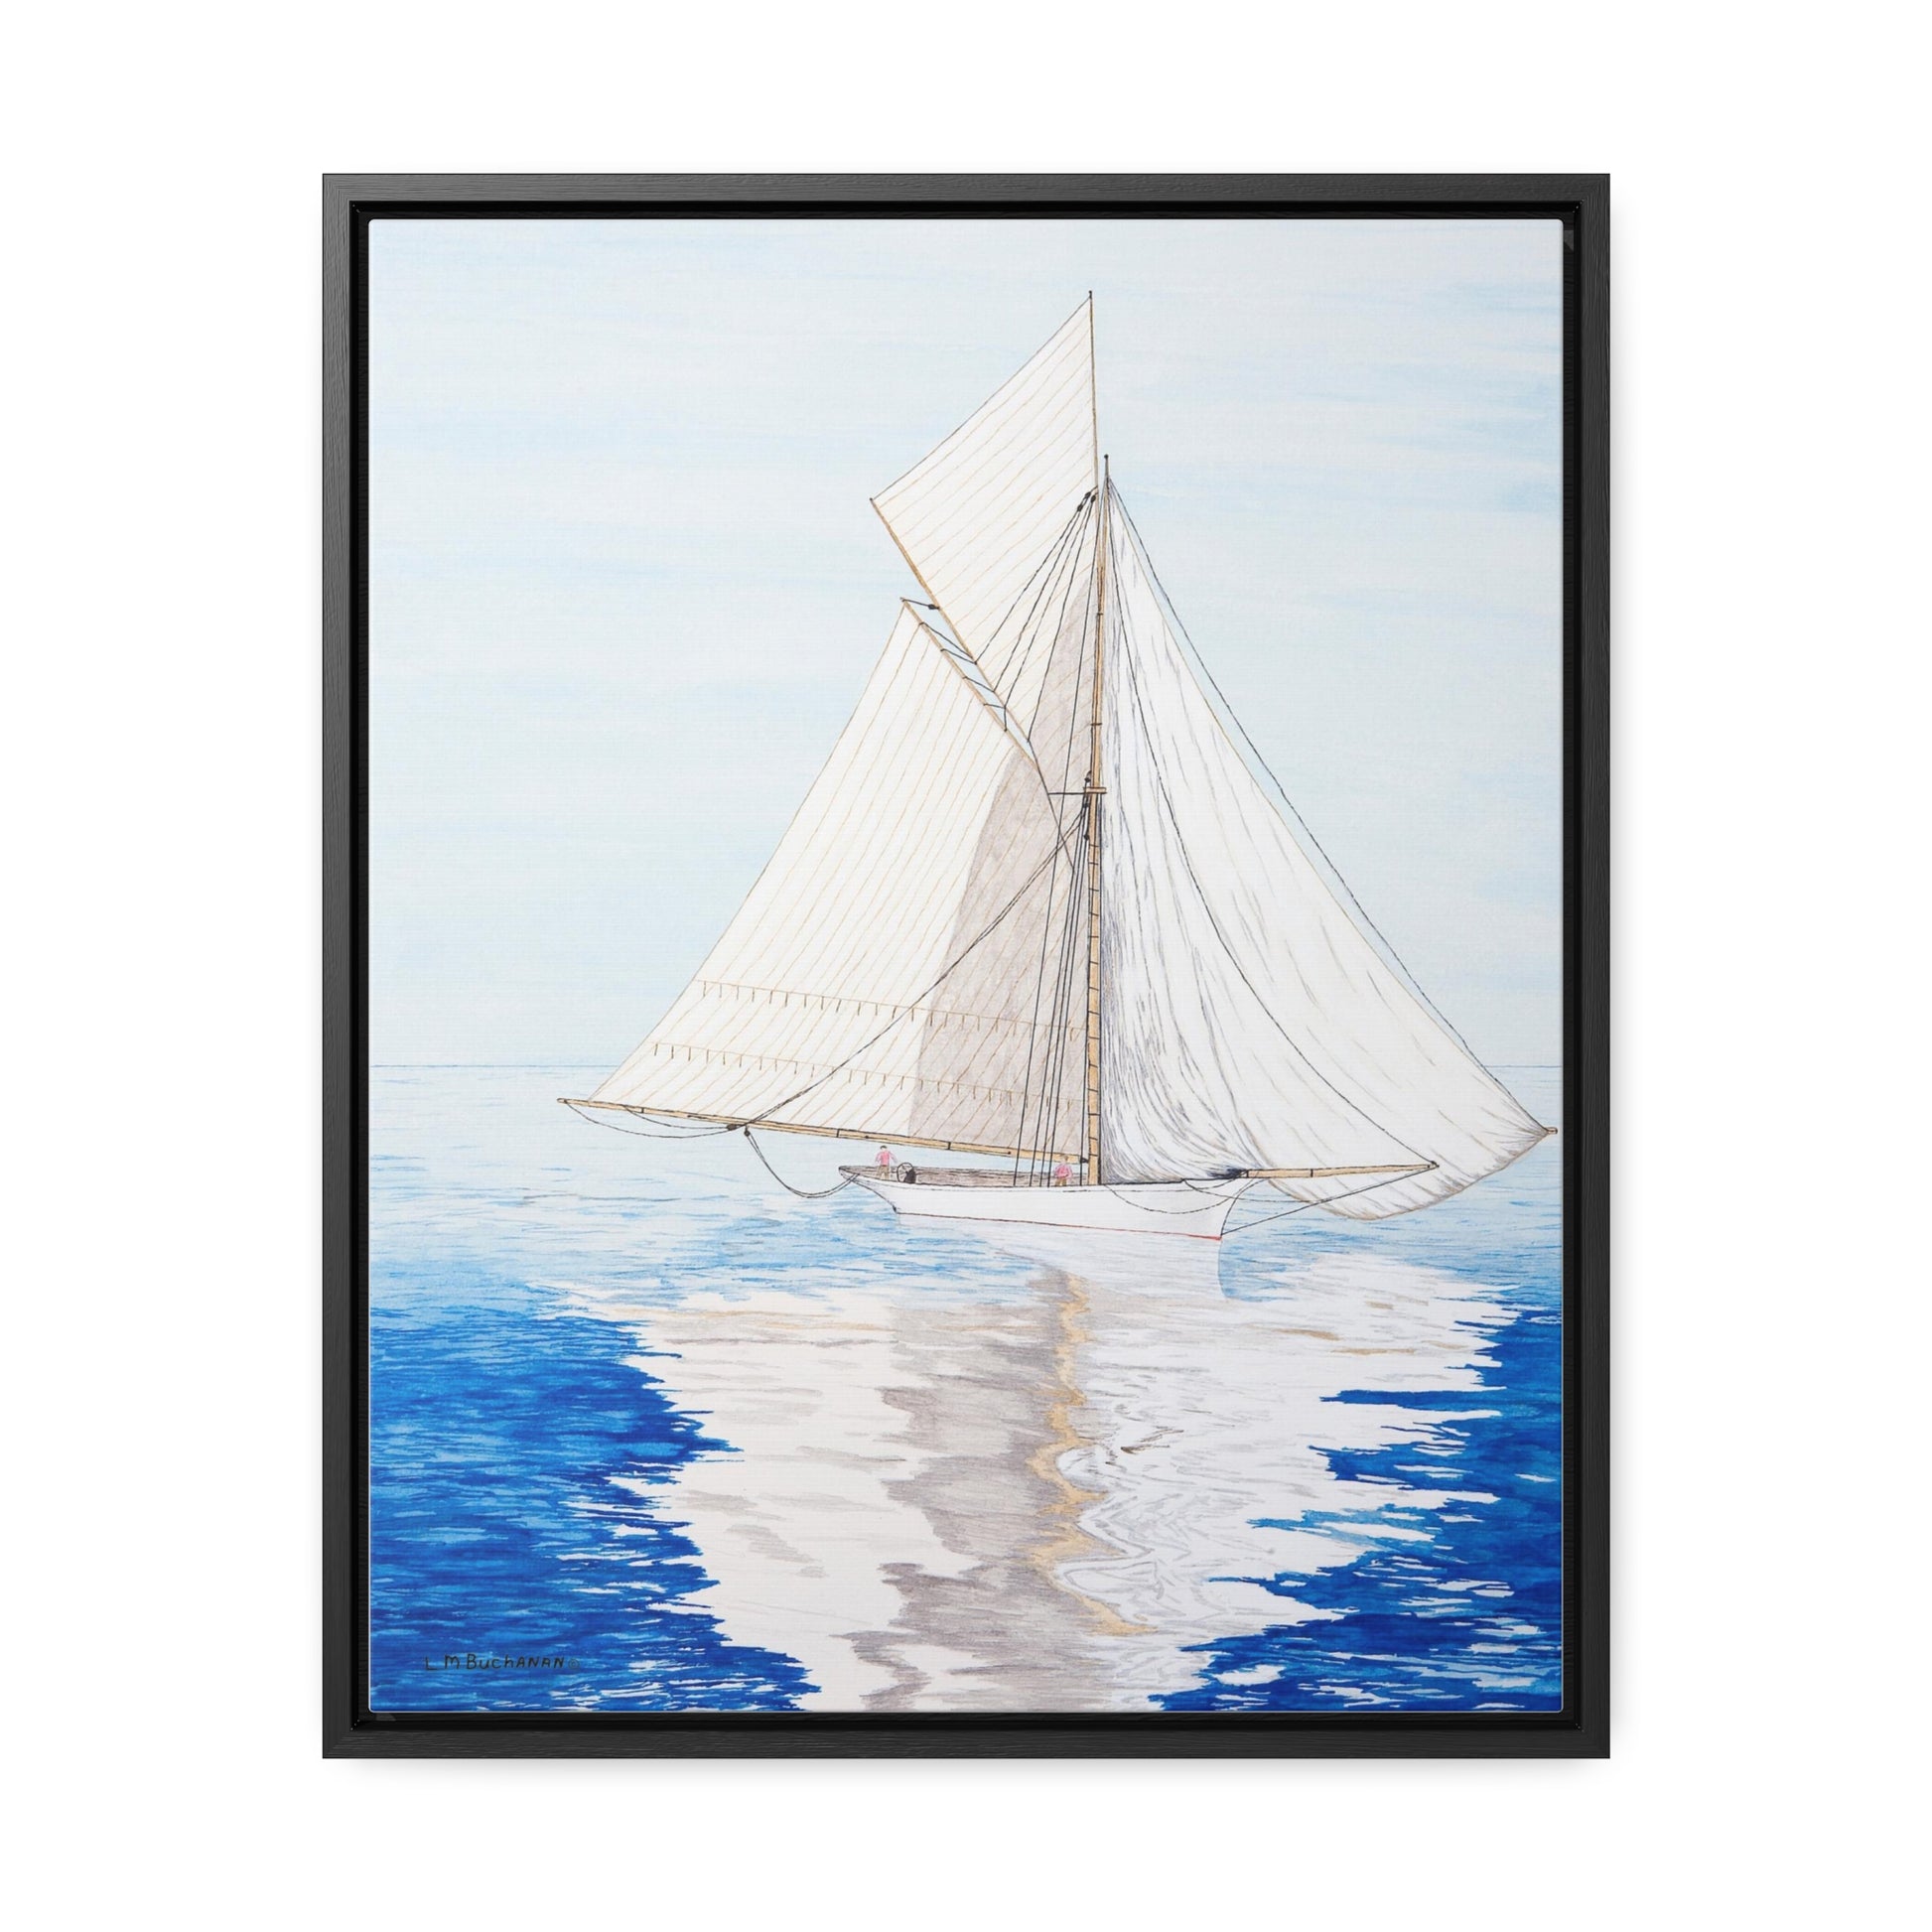 The stunning Becalmed Gallery Canvas Wrap will add a nautical touch to a favorite room.